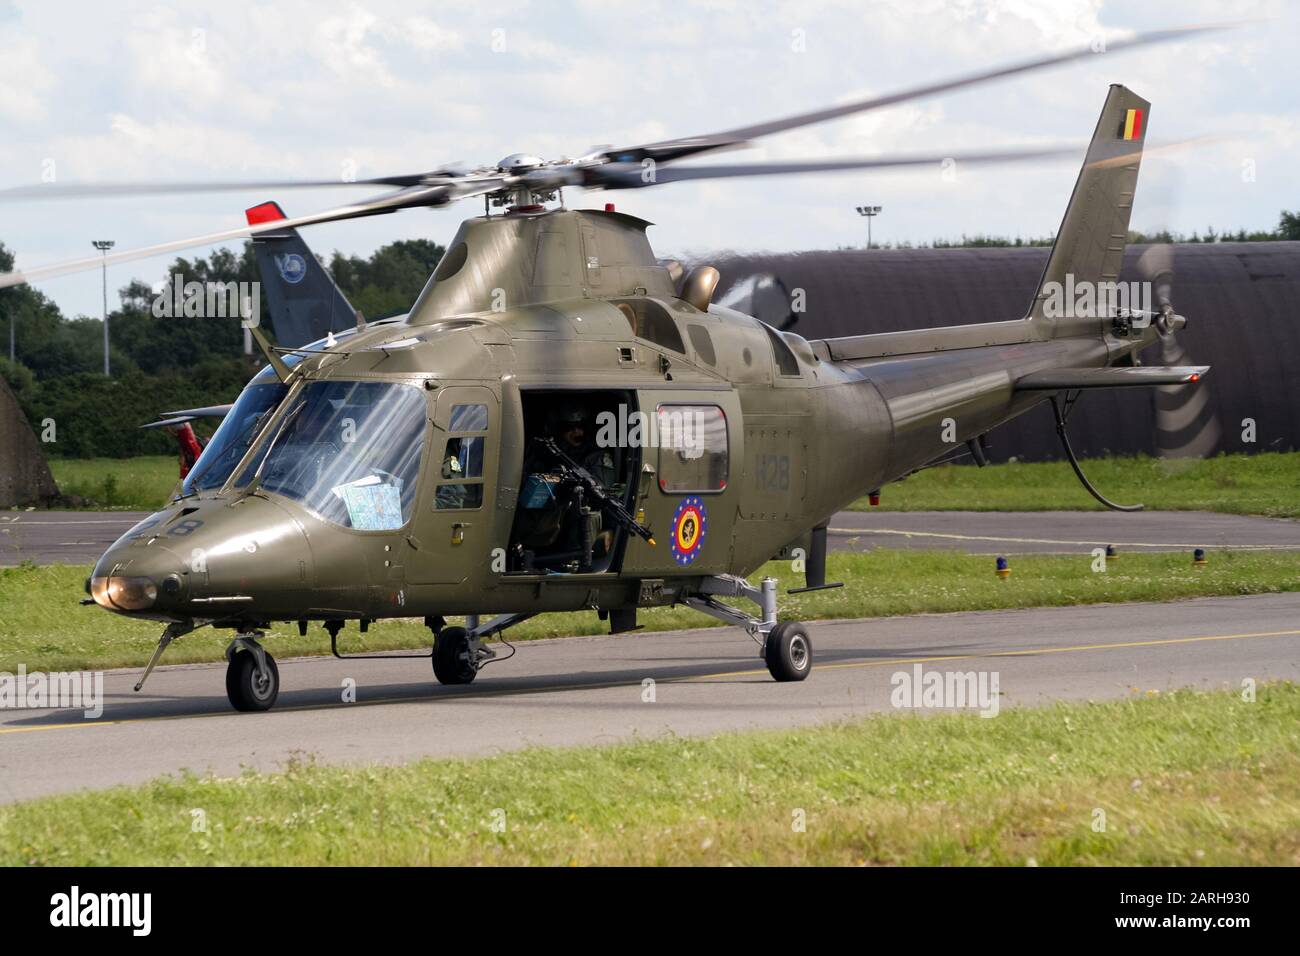 FLORENNES, BELGIUM - JUL 6, 2008: Belgian Army Agusta A109 helicopter taxiing on Florennes airbase. Stock Photo